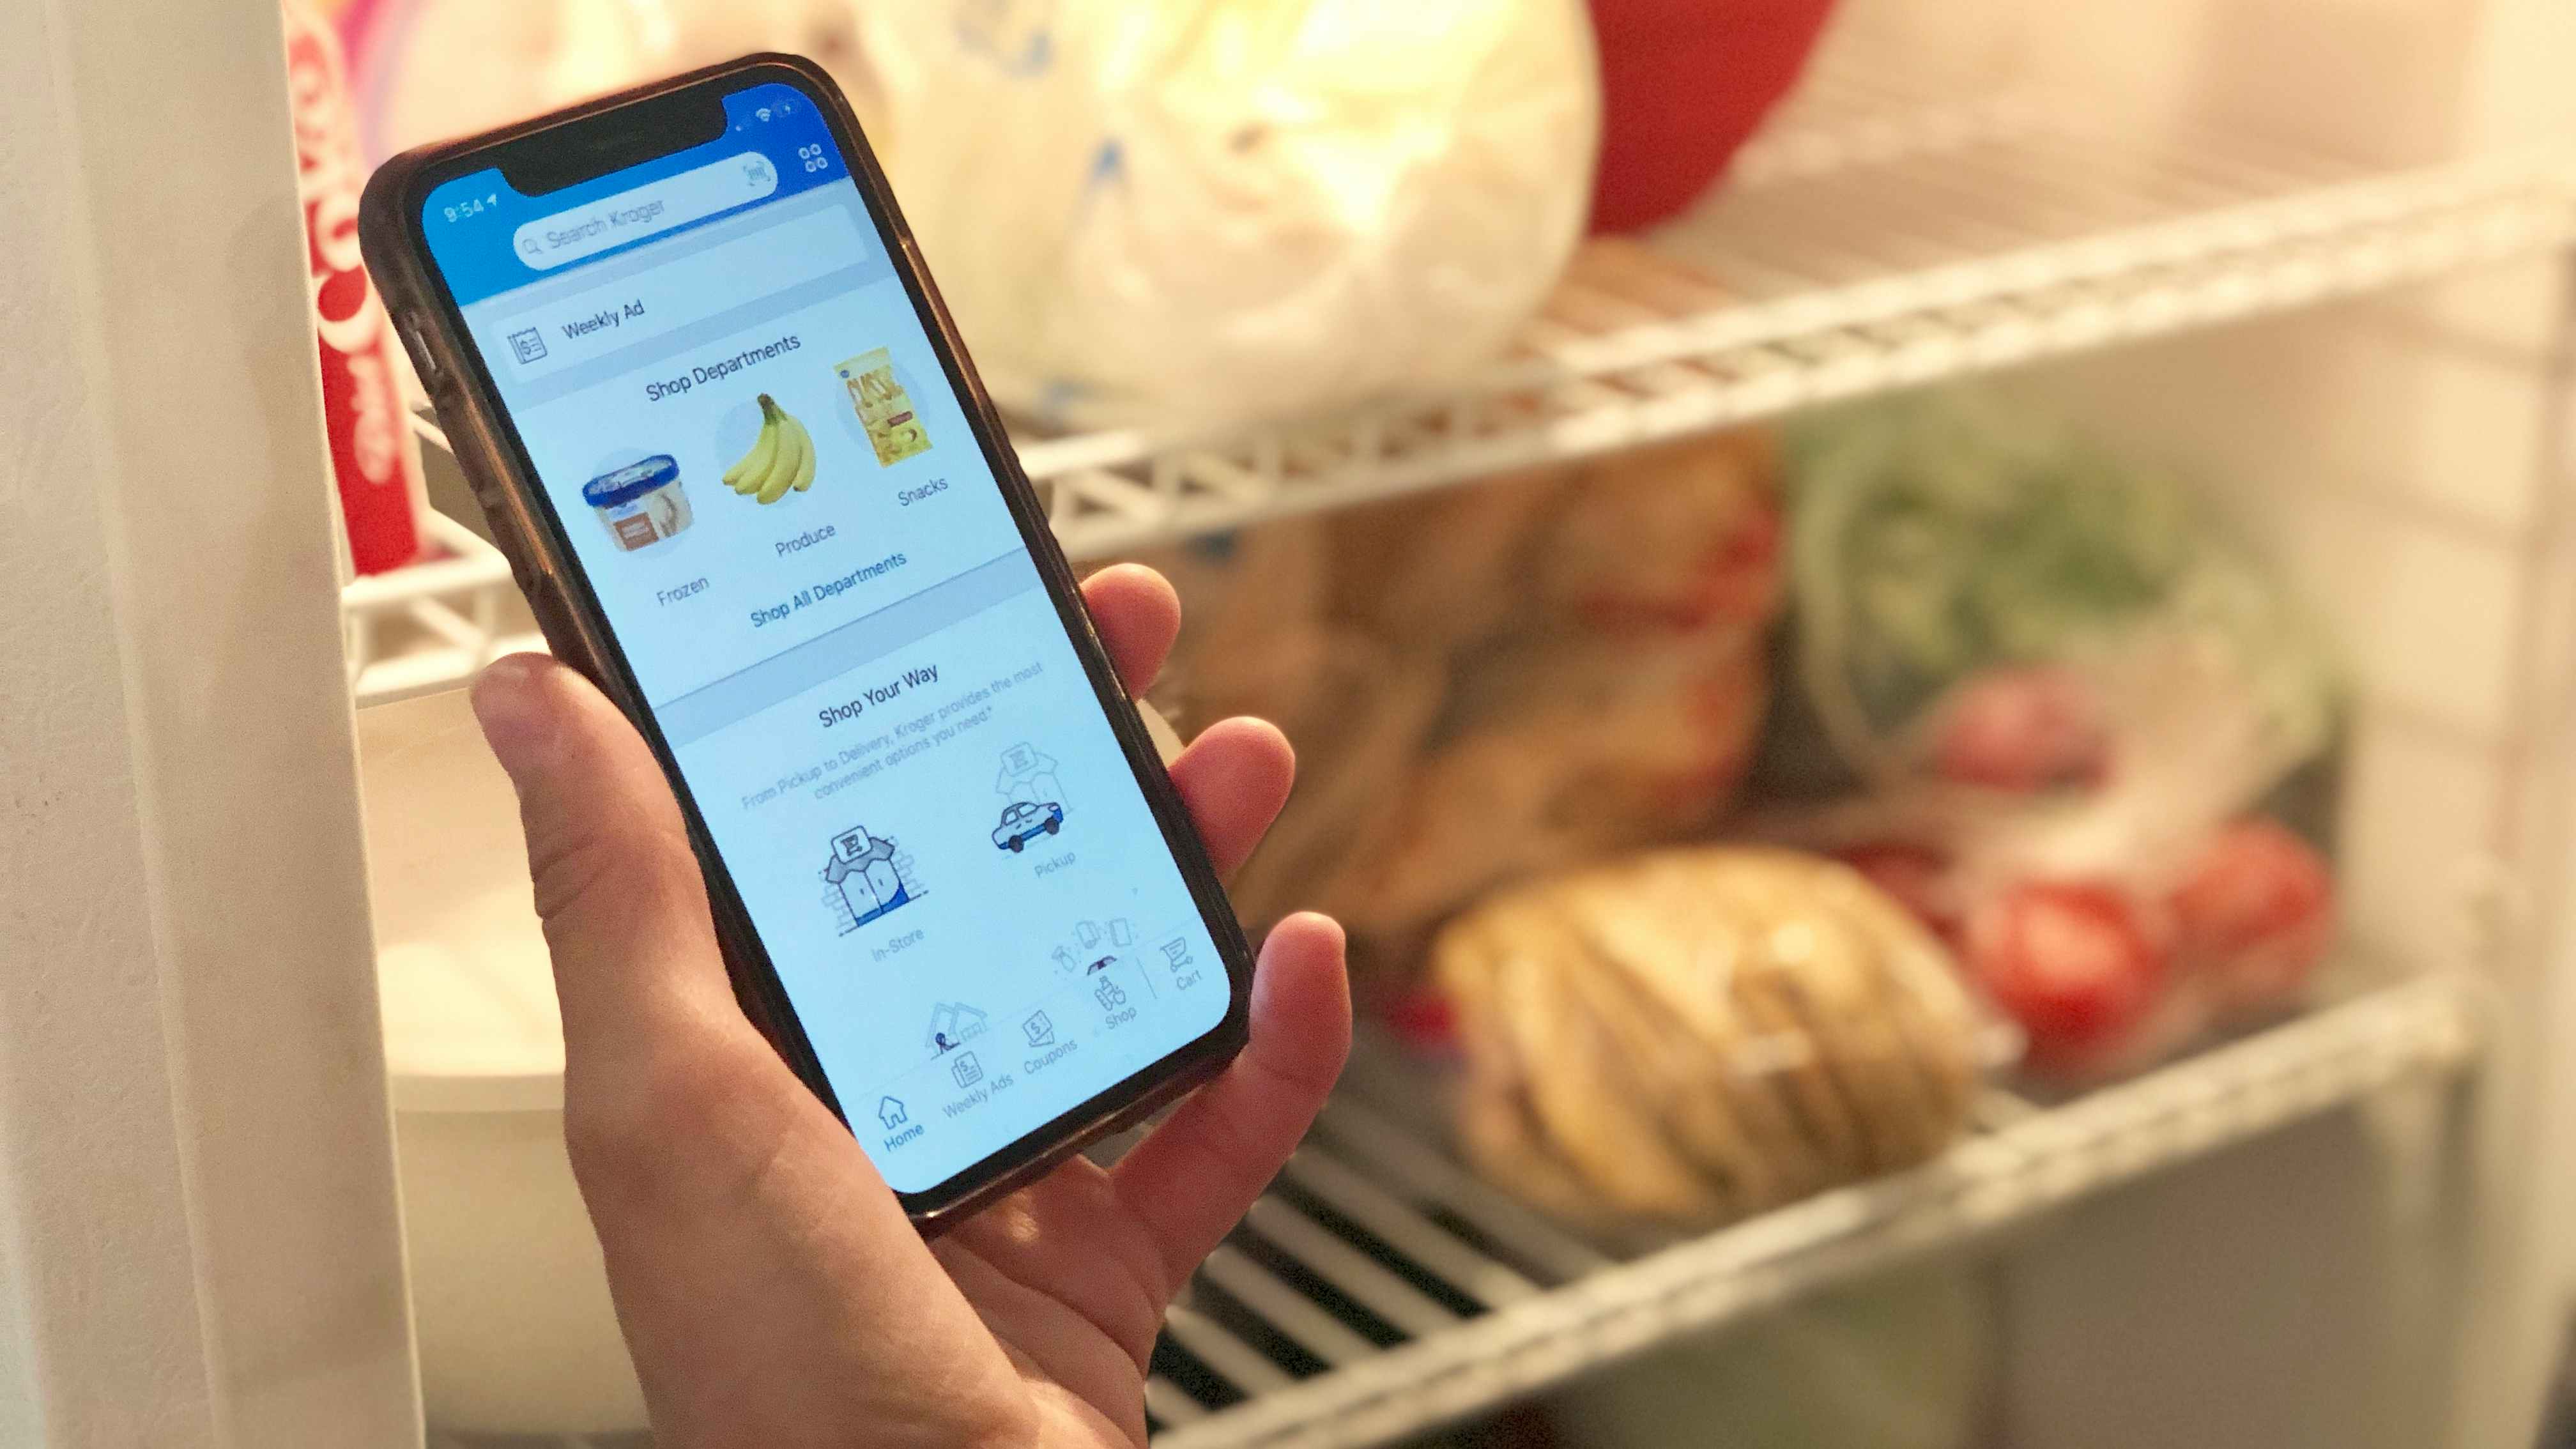 You can make an online order through the Kroger app and get your items delivered.